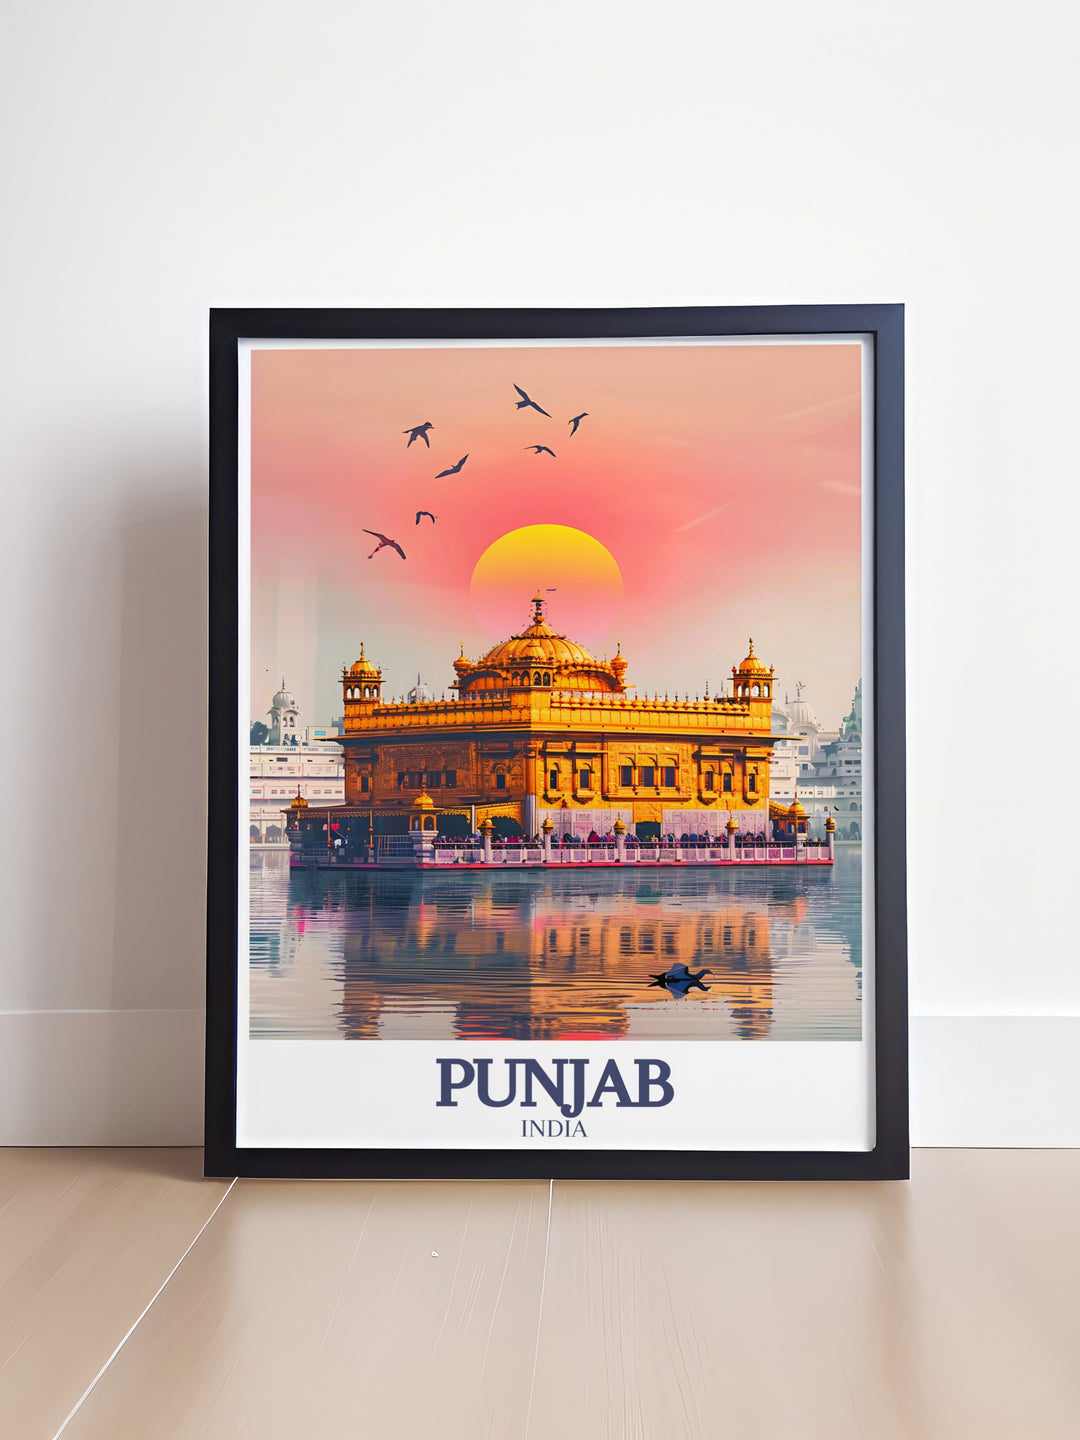 Punjab travel poster print featuring the Golden Temple, Amrit Sarovar bringing the historical and spiritual essence of Punjab into your home ideal for travel enthusiasts and those who appreciate cultural richness.